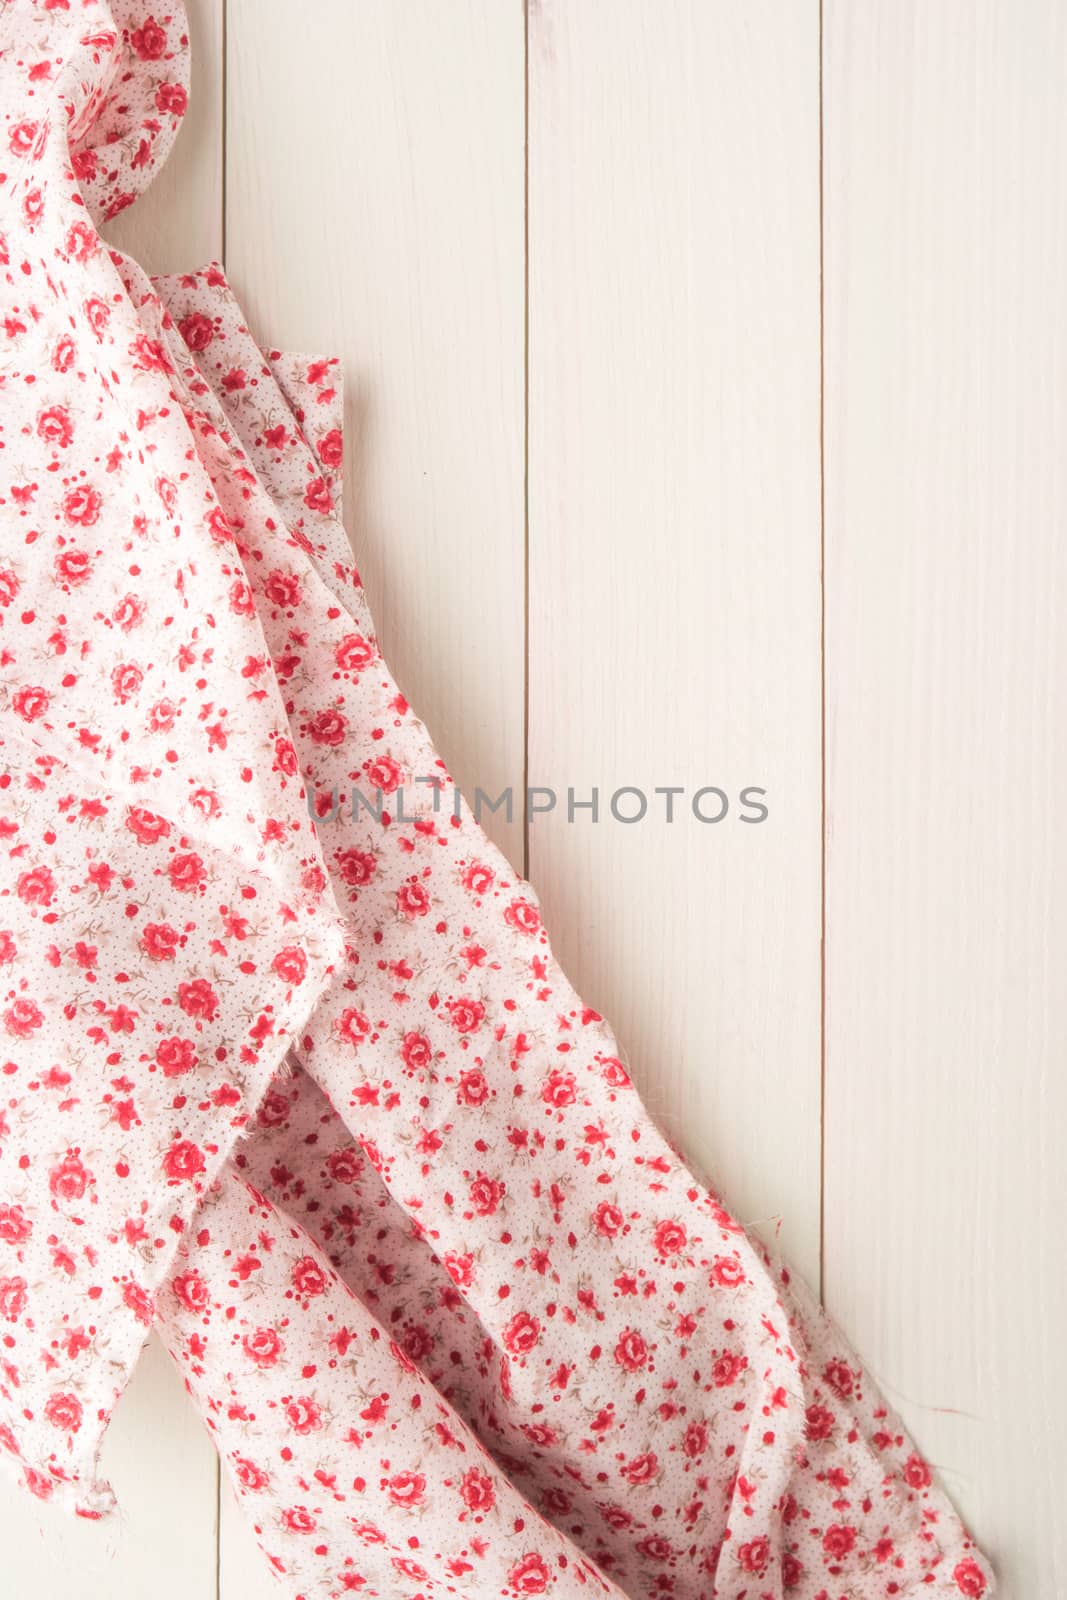 Little flowers fabric over wooden kitchen table. Top of view with copy space